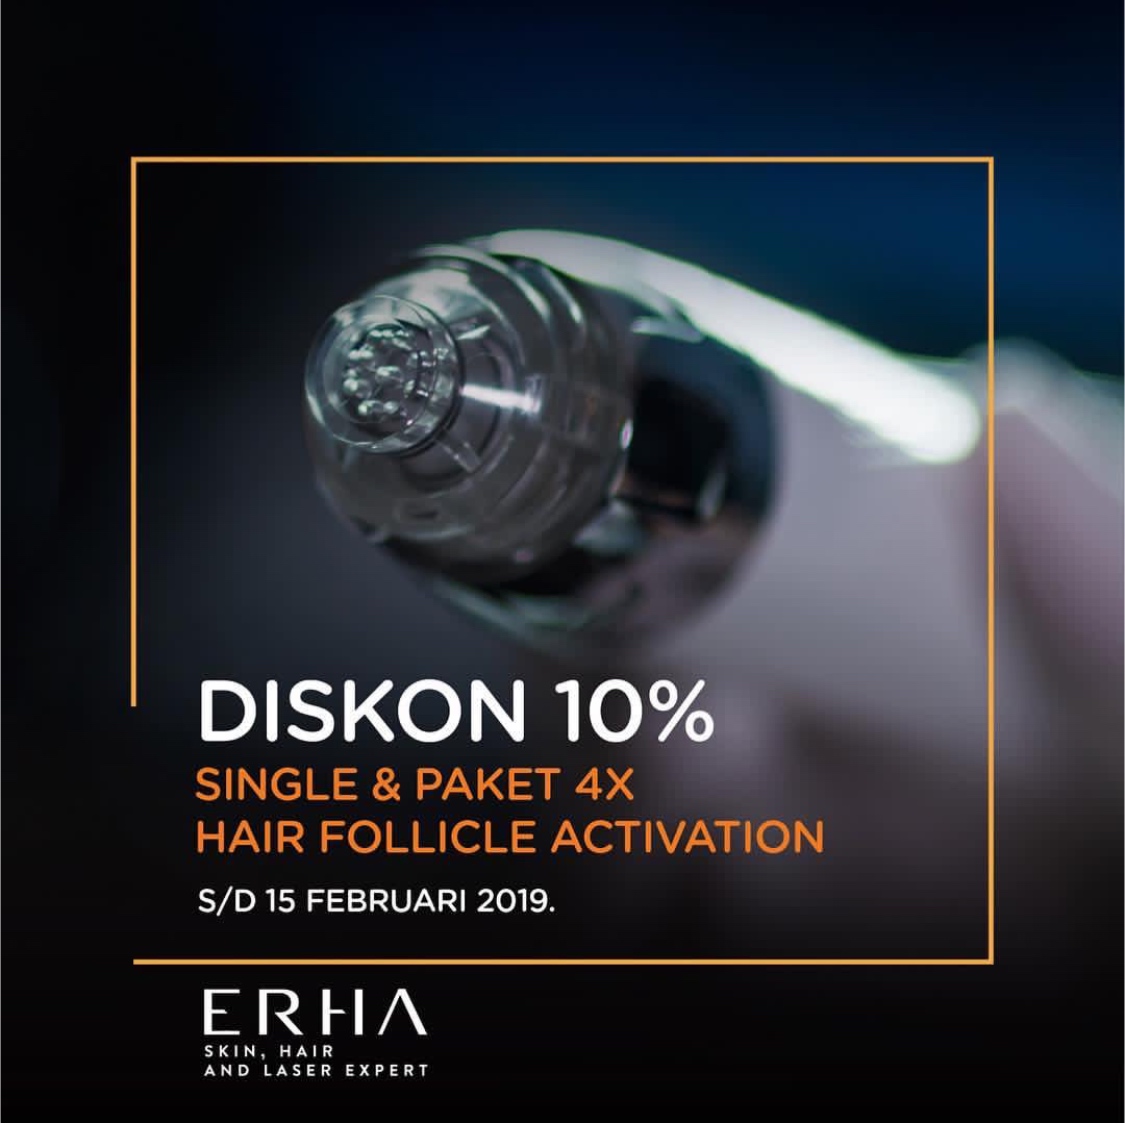 erha-clinic-hair-follicle-activation-therapy-review.jpg